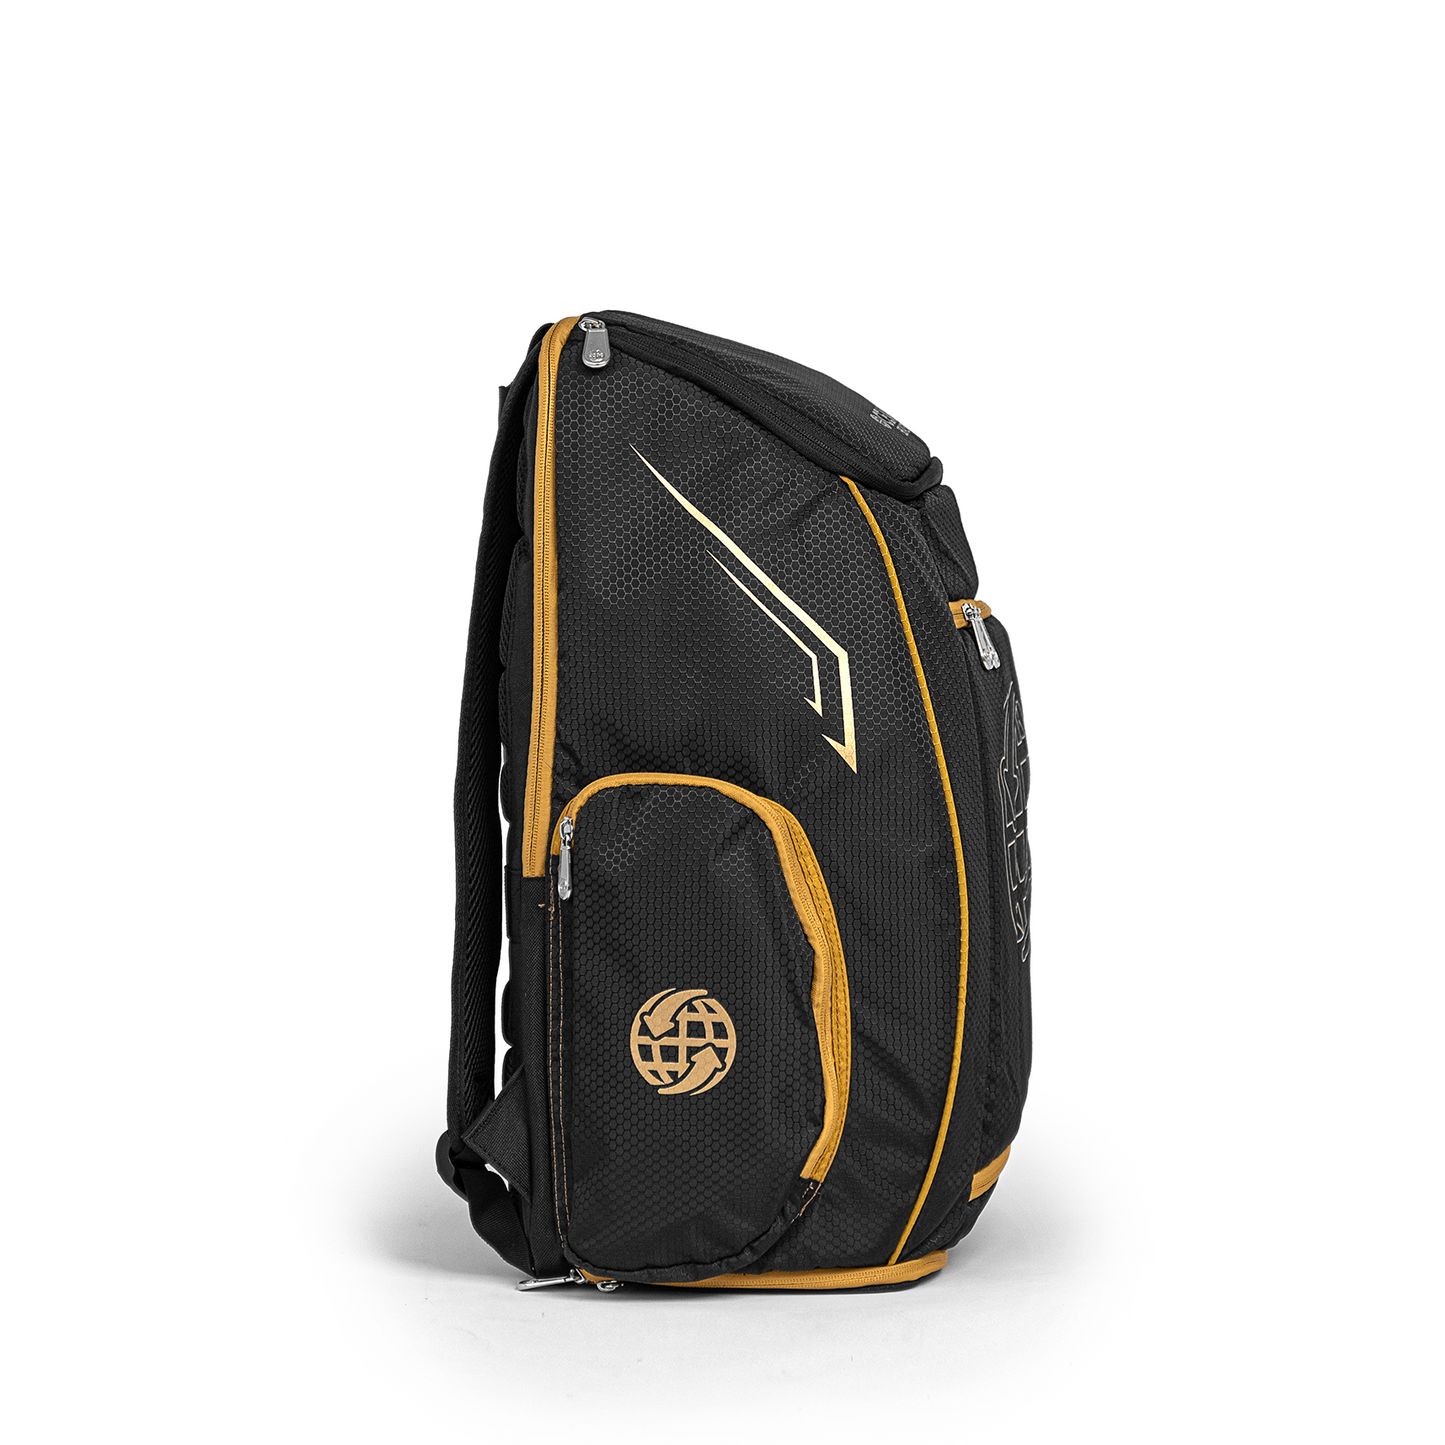 Load image into Gallery viewer, PRO BT BACKPACK BLACK
